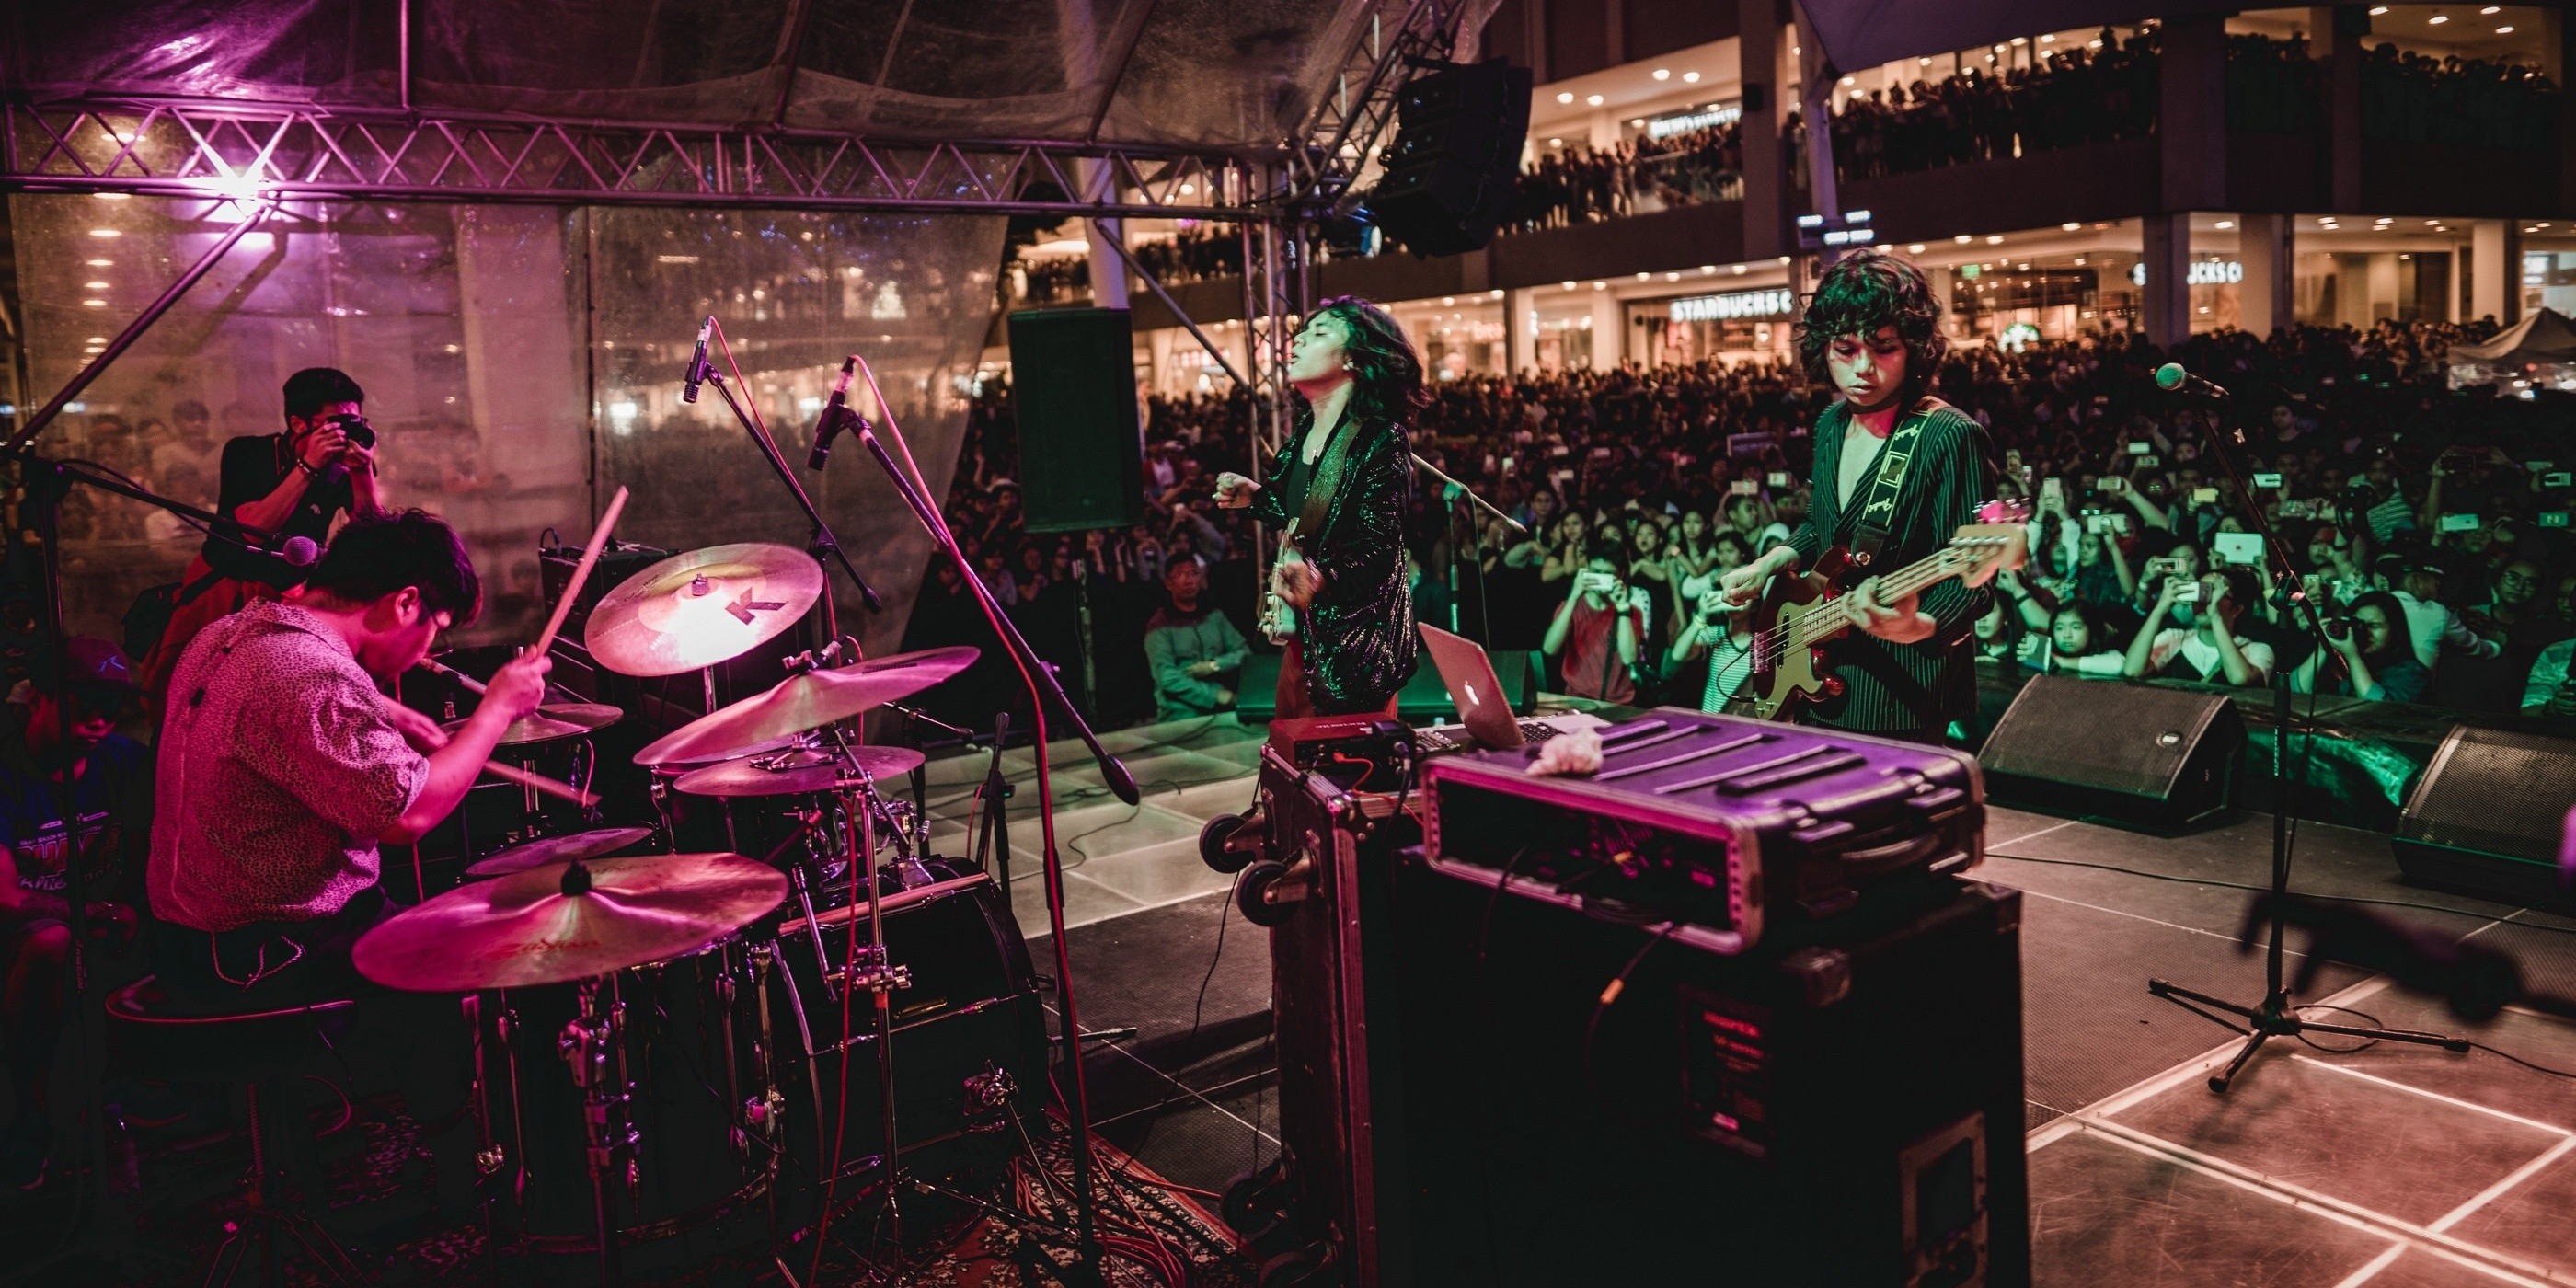 IV of Spades take us back to the crazy fun world of Filipino mall shows